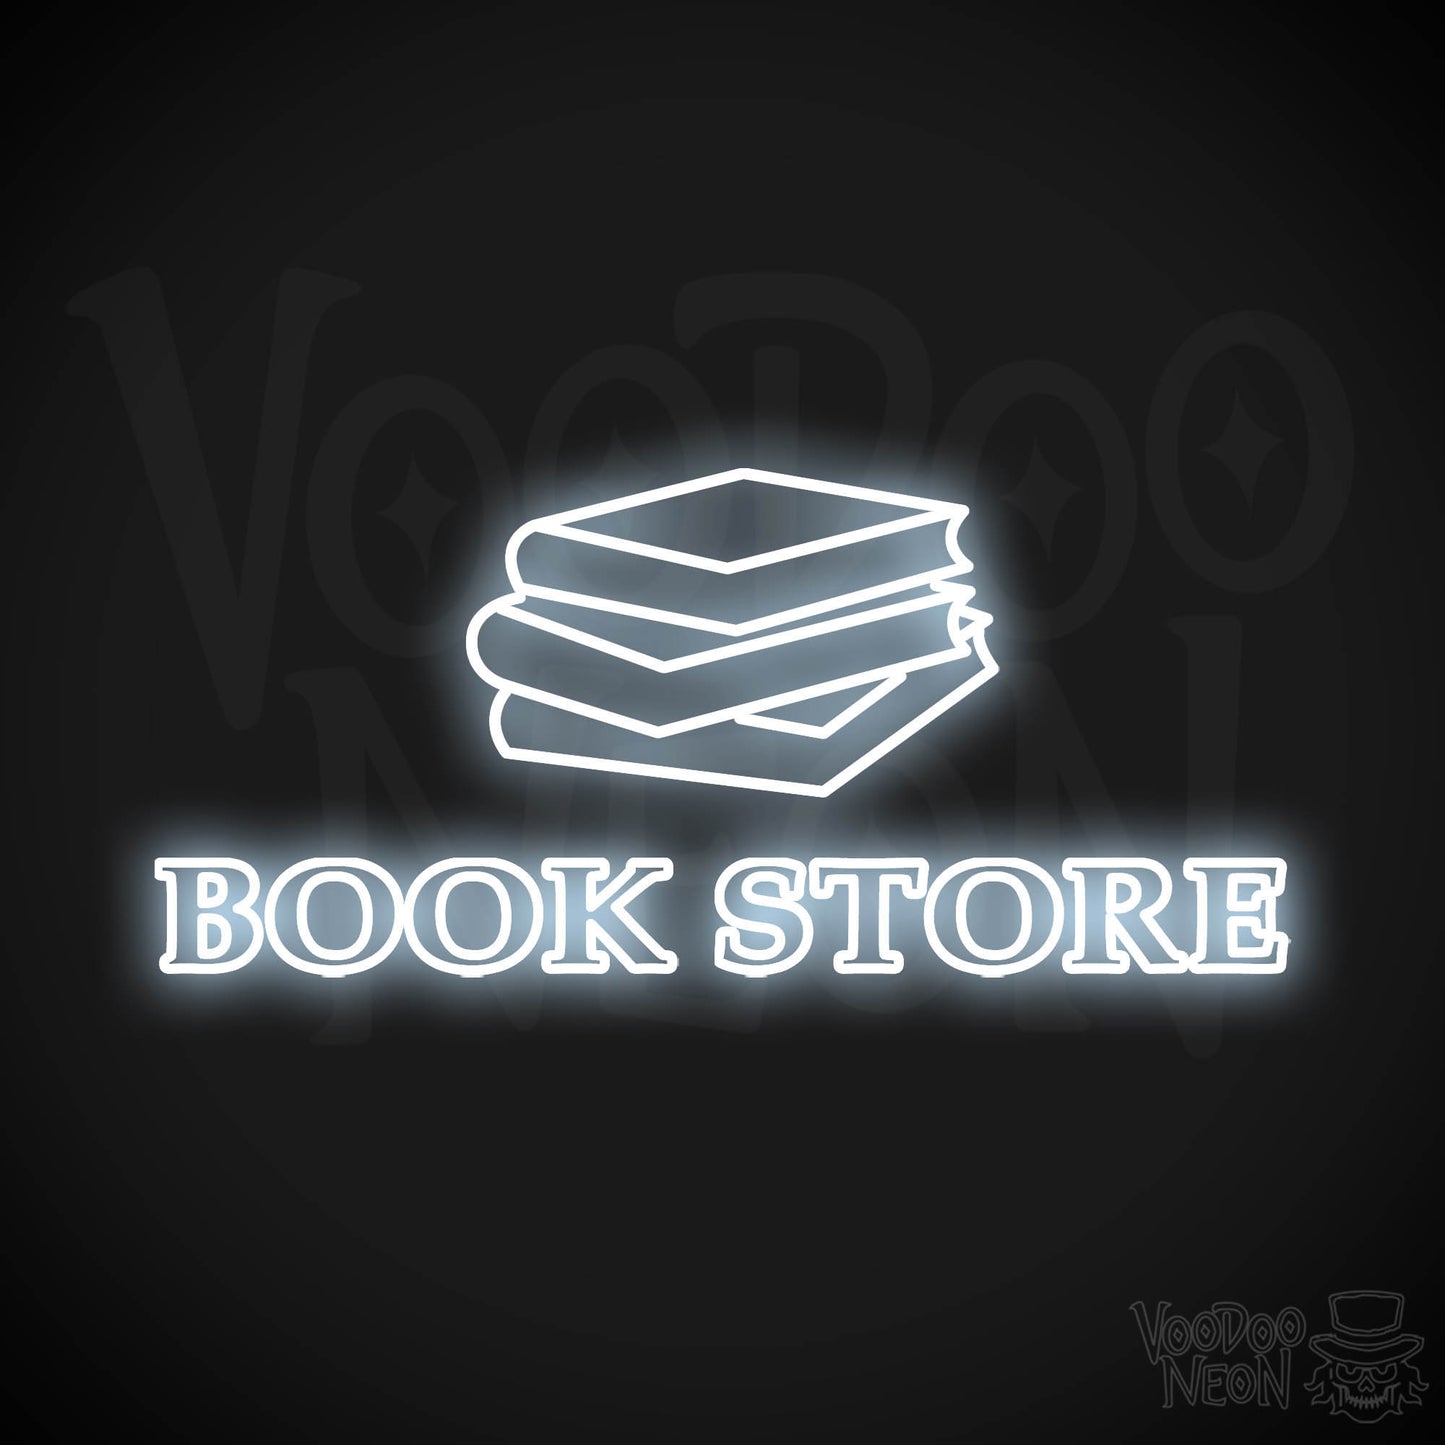 Book Store LED Neon - Cool White